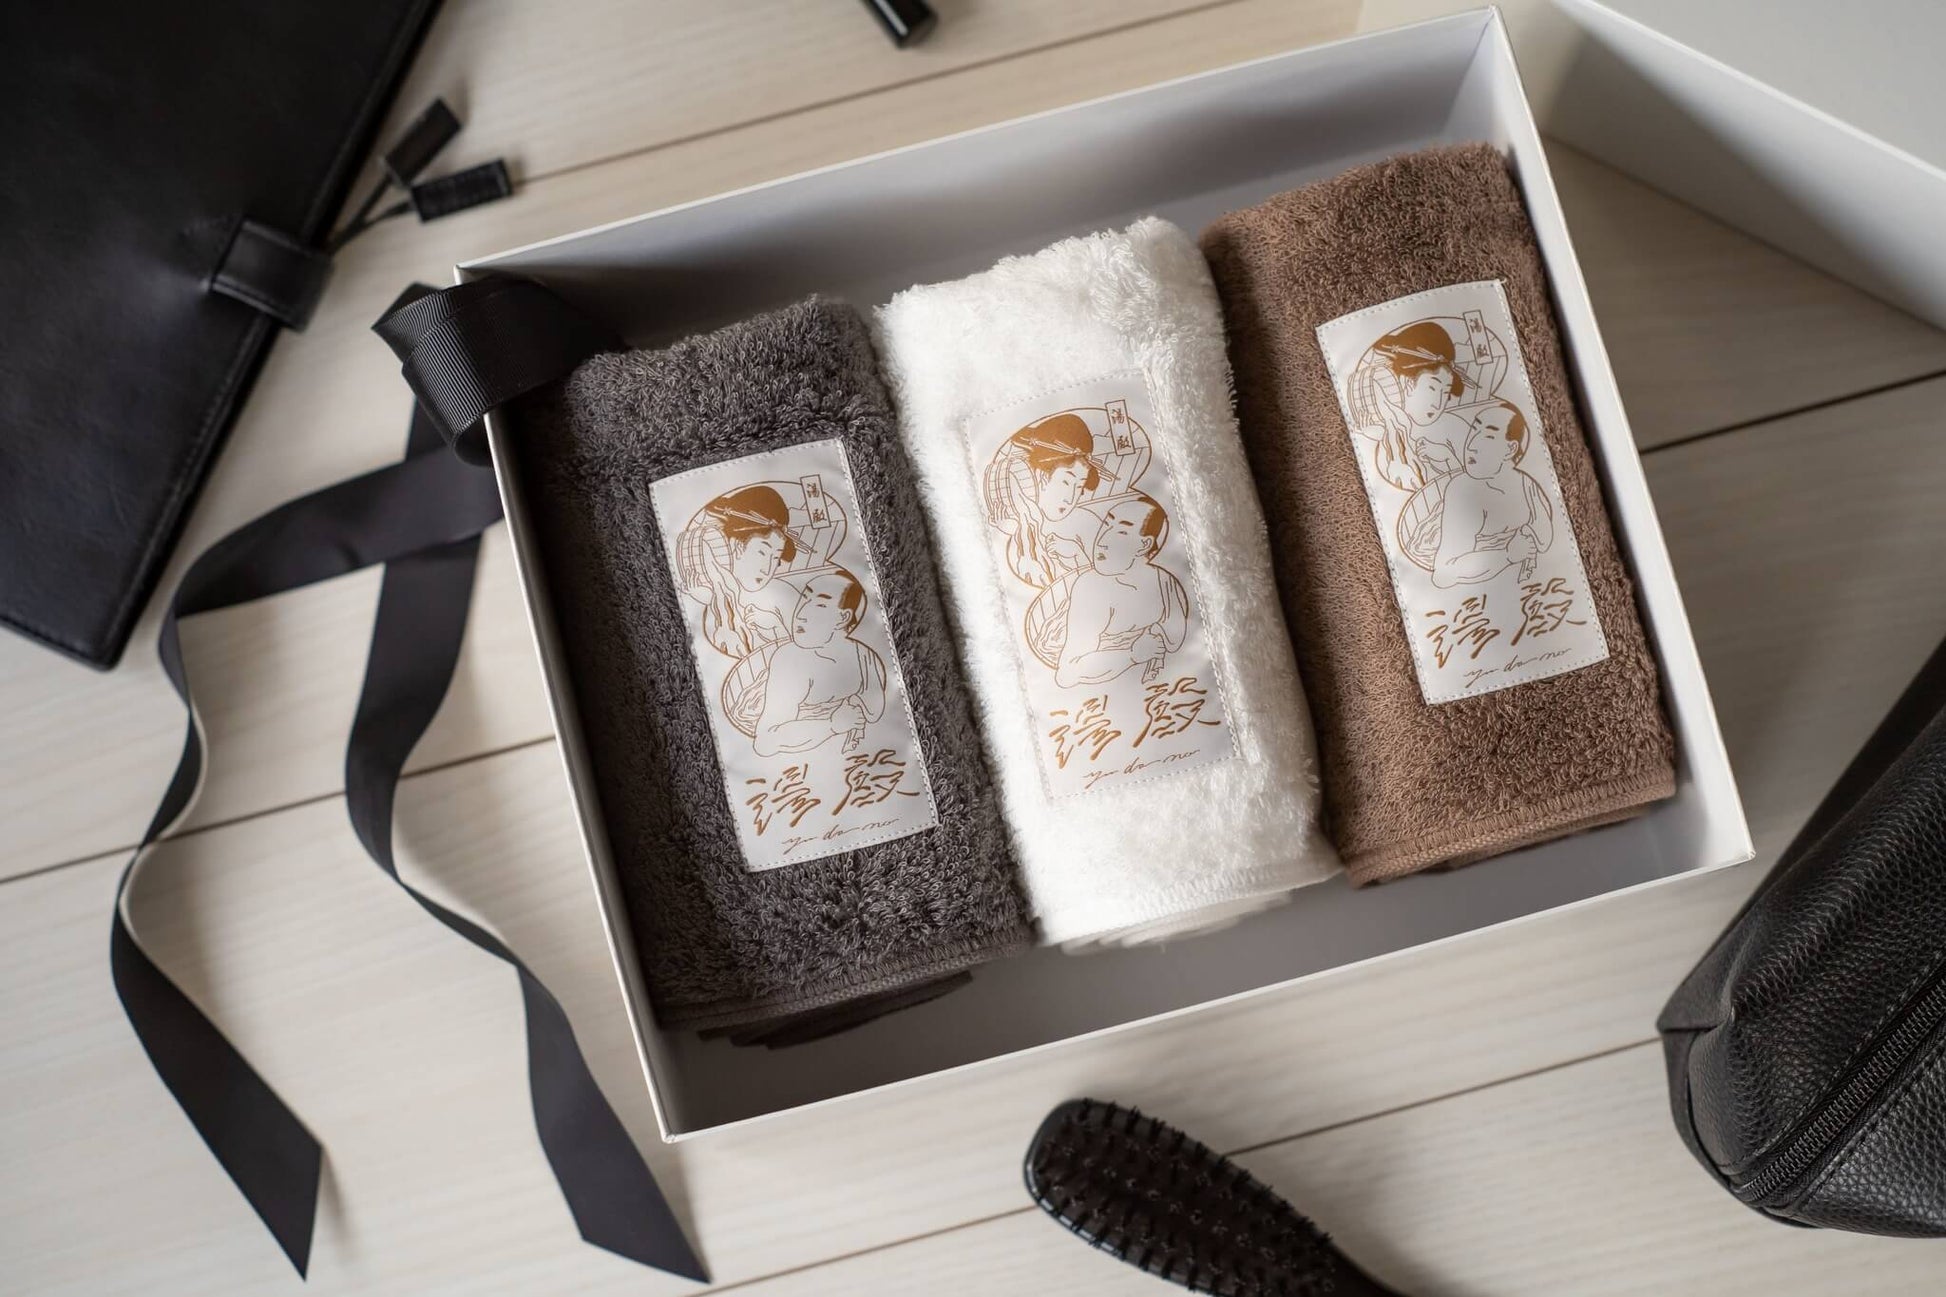 Three different colors of Japanese Bath Towels from Japarcana